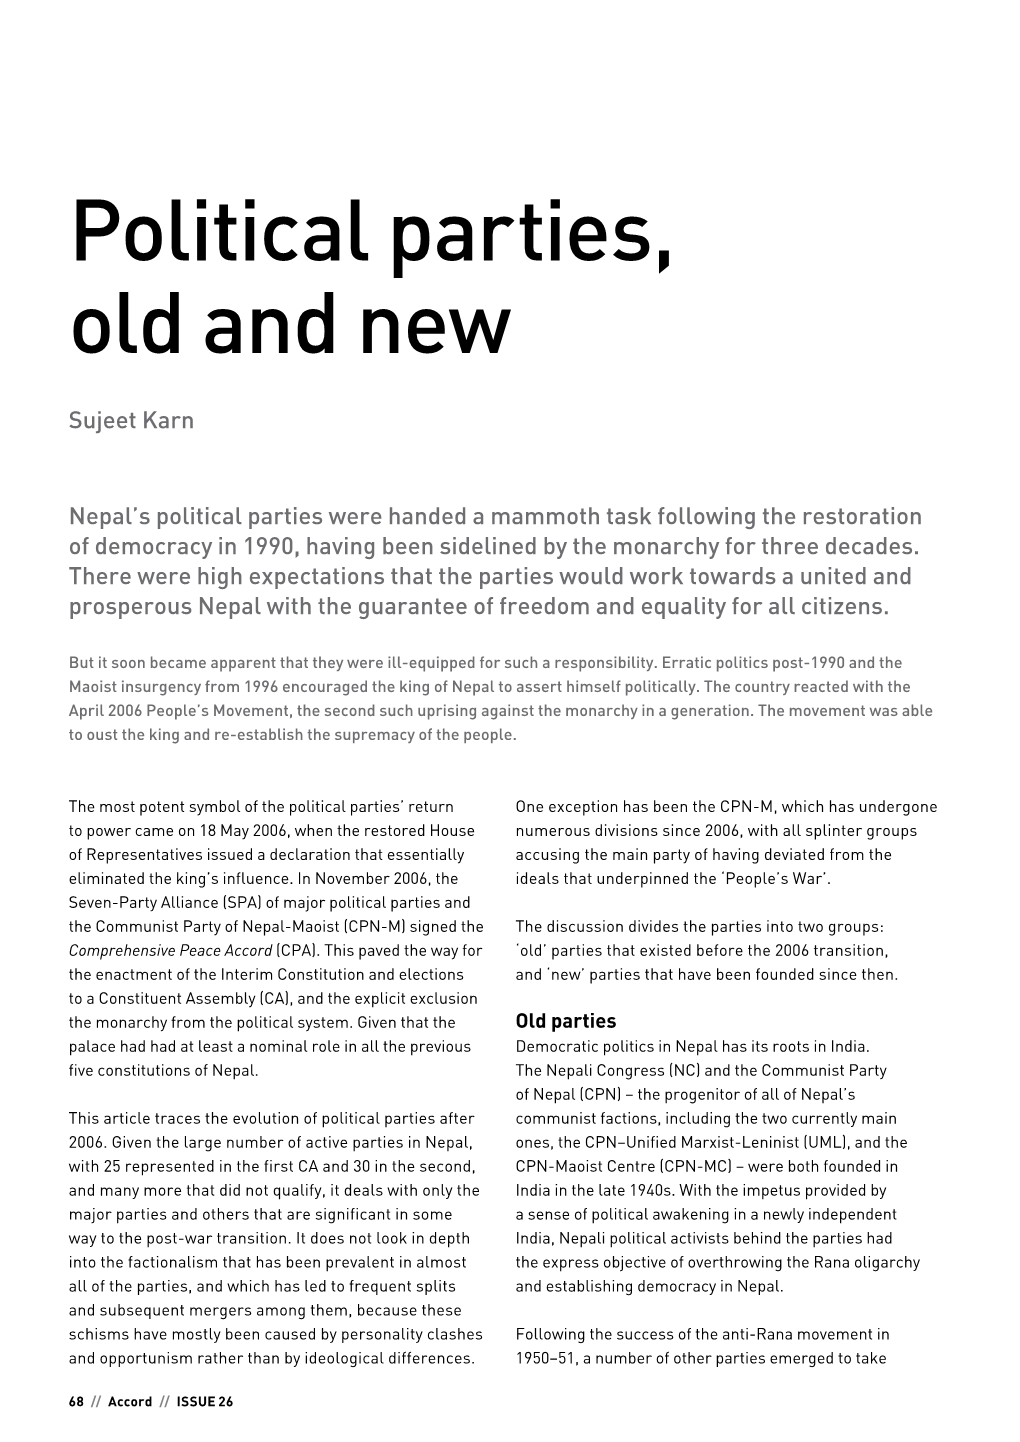 Political Parties, Old and New